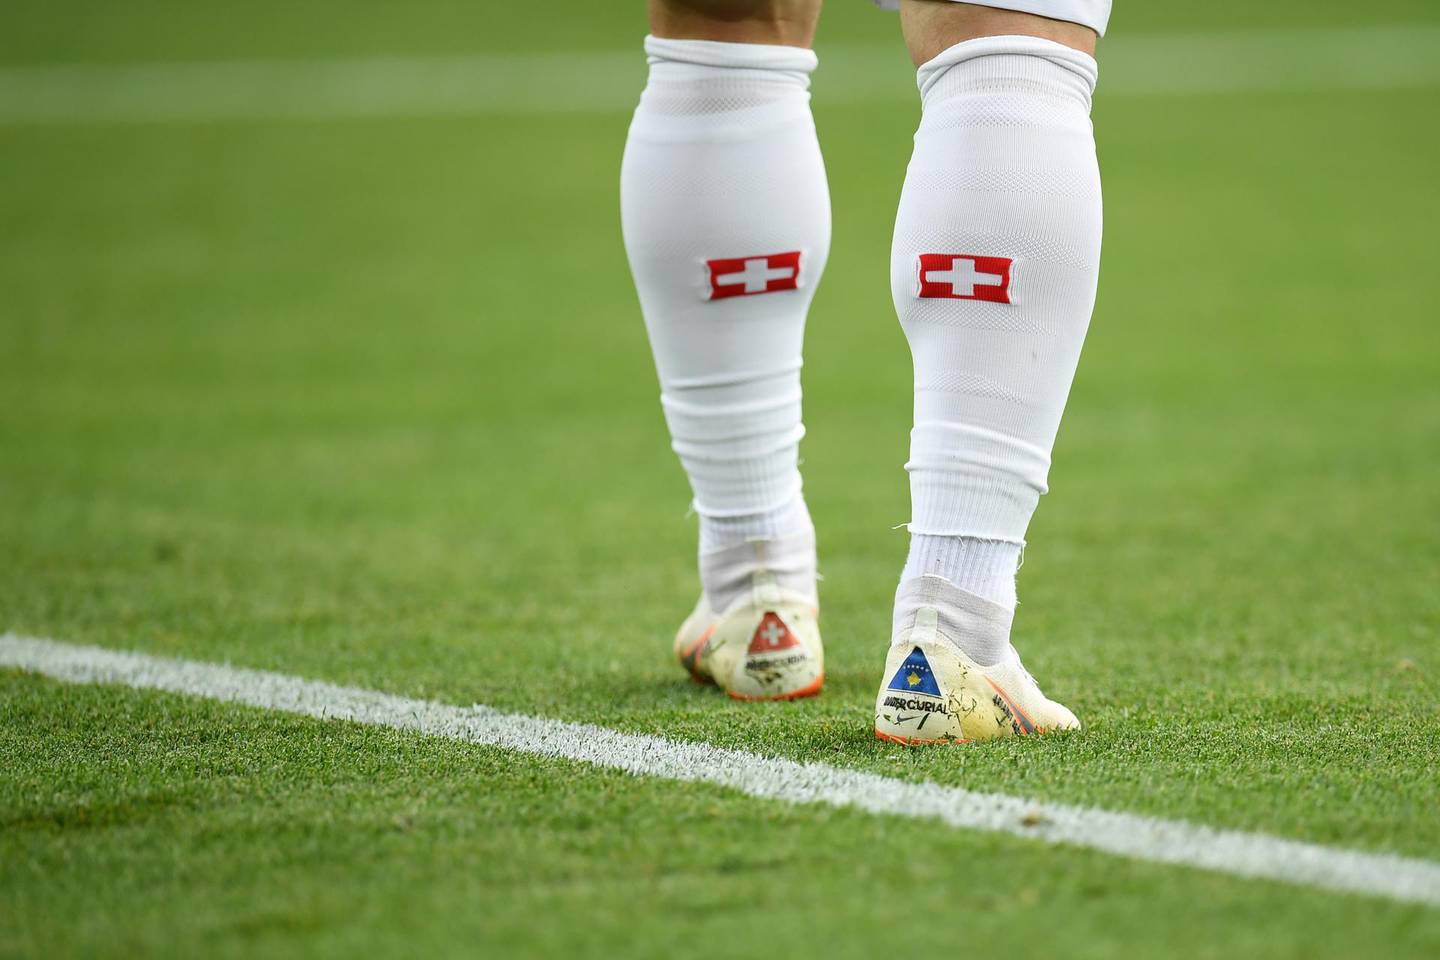 KALININGRAD, RUSSIA - JUNE 22:  The Kosovo flag is seen on Xherdan Shaqiri of Switzerland's boots during the 2018 FIFA World Cup Russia group E match between Serbia and Switzerland at Kaliningrad Stadium on June 22, 2018 in Kaliningrad, Russia.  (Photo by Matthias Hangst/Getty Images)